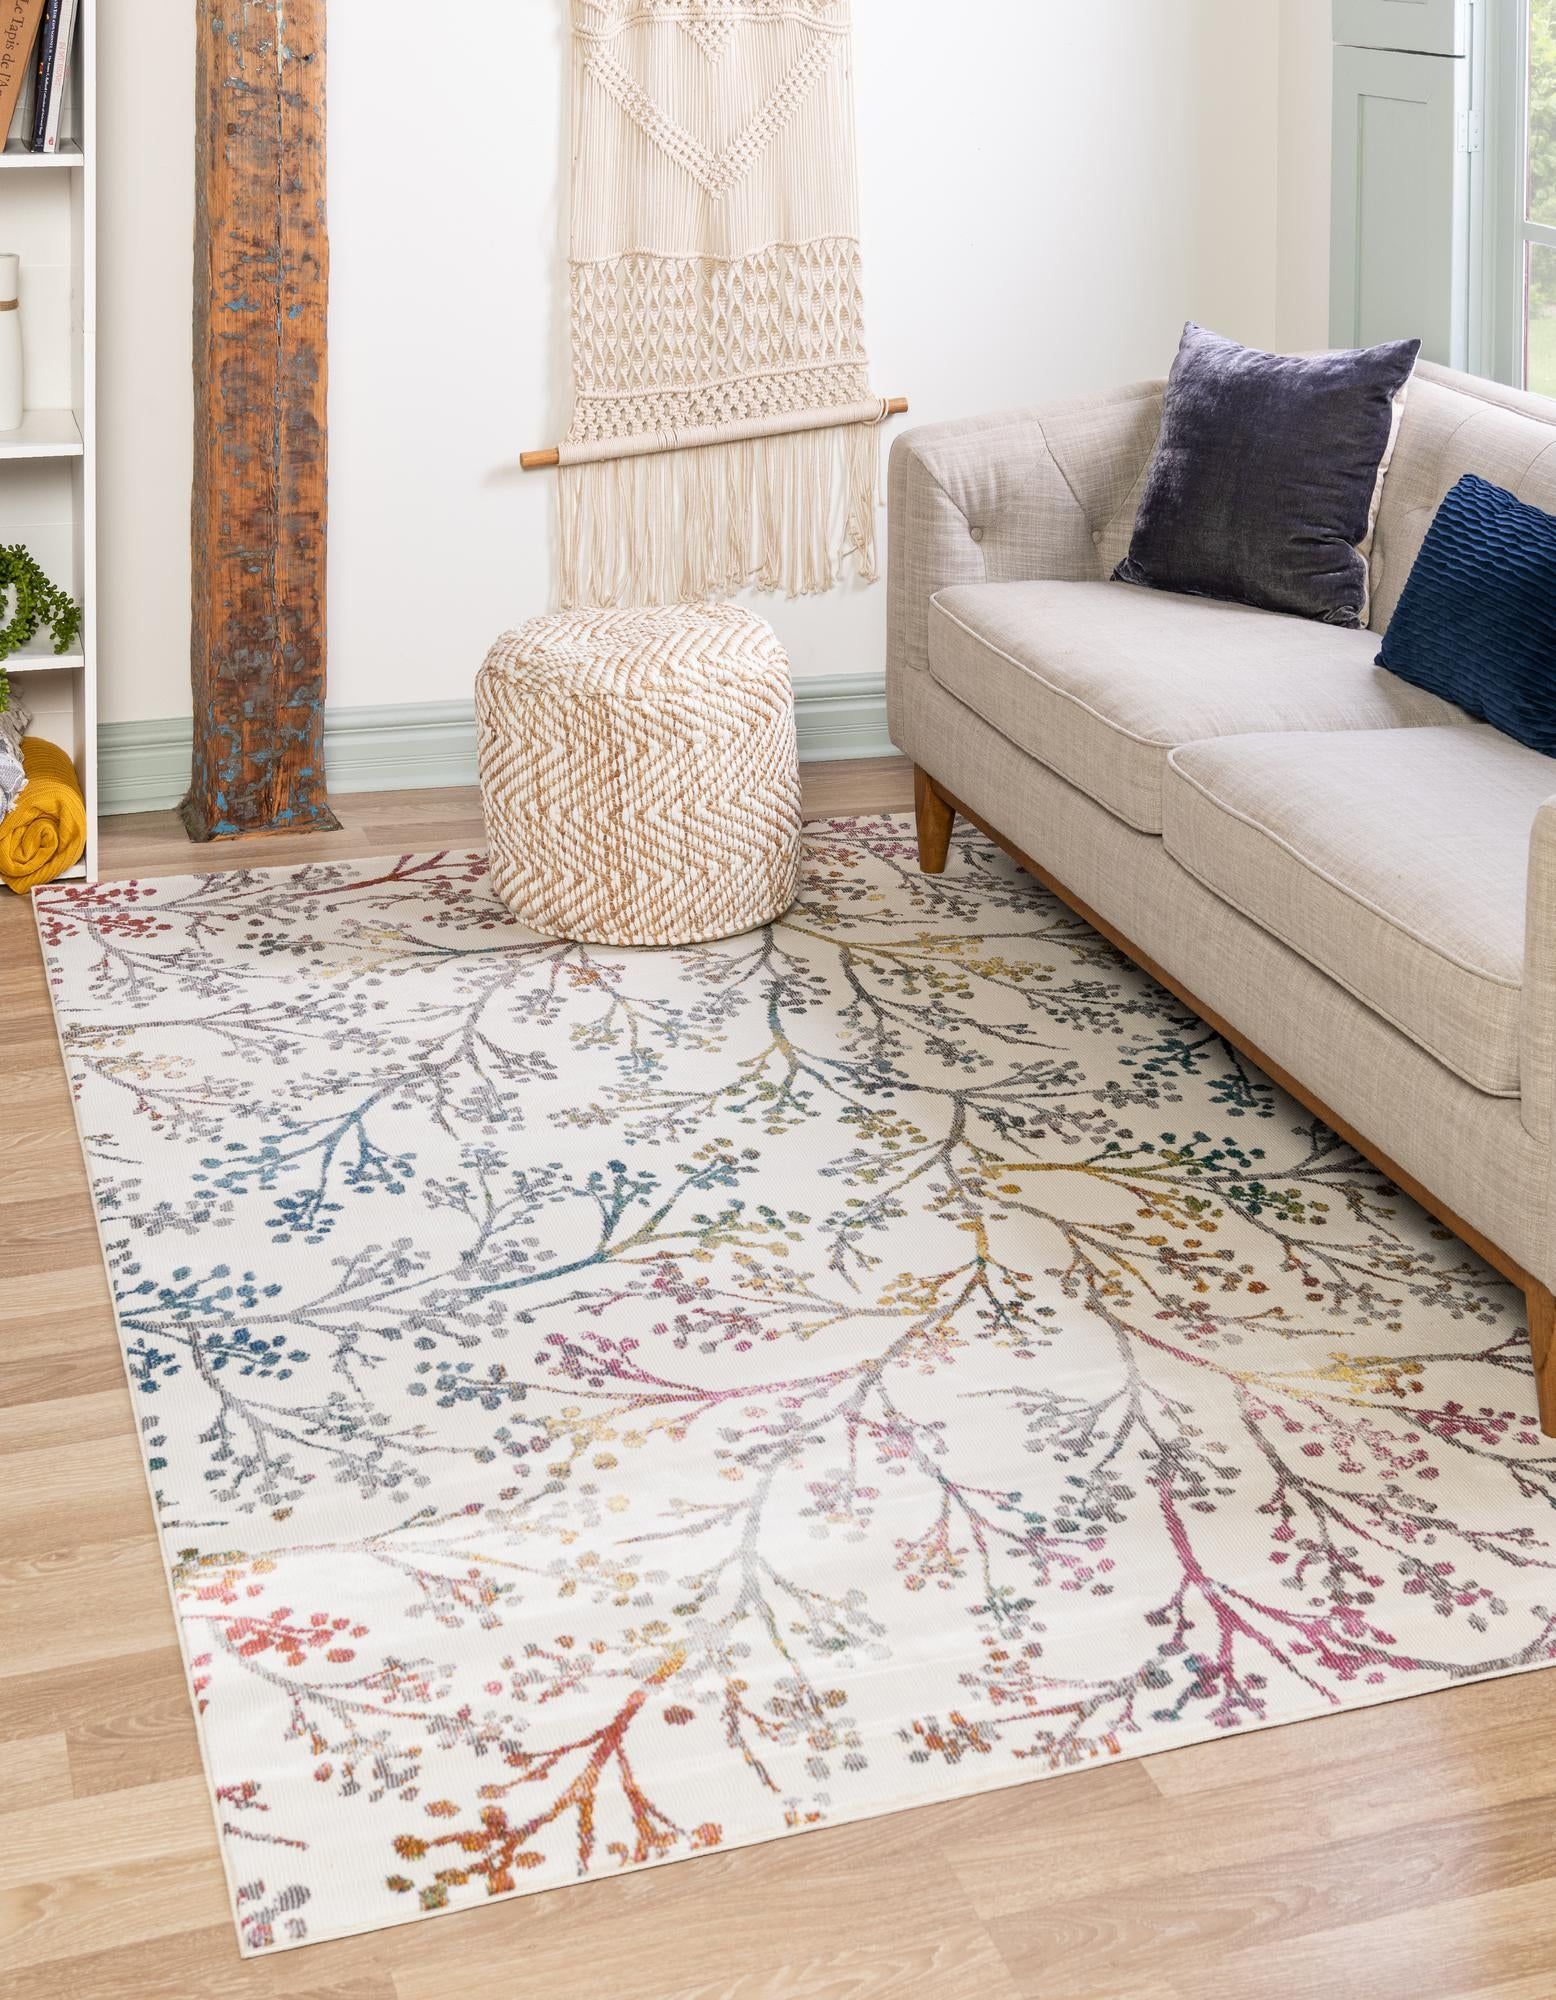 Ivory 122cm X 183cm Blossom Rug | Irugs Ch With Regard To Ivory Blossom Rugs (View 7 of 15)